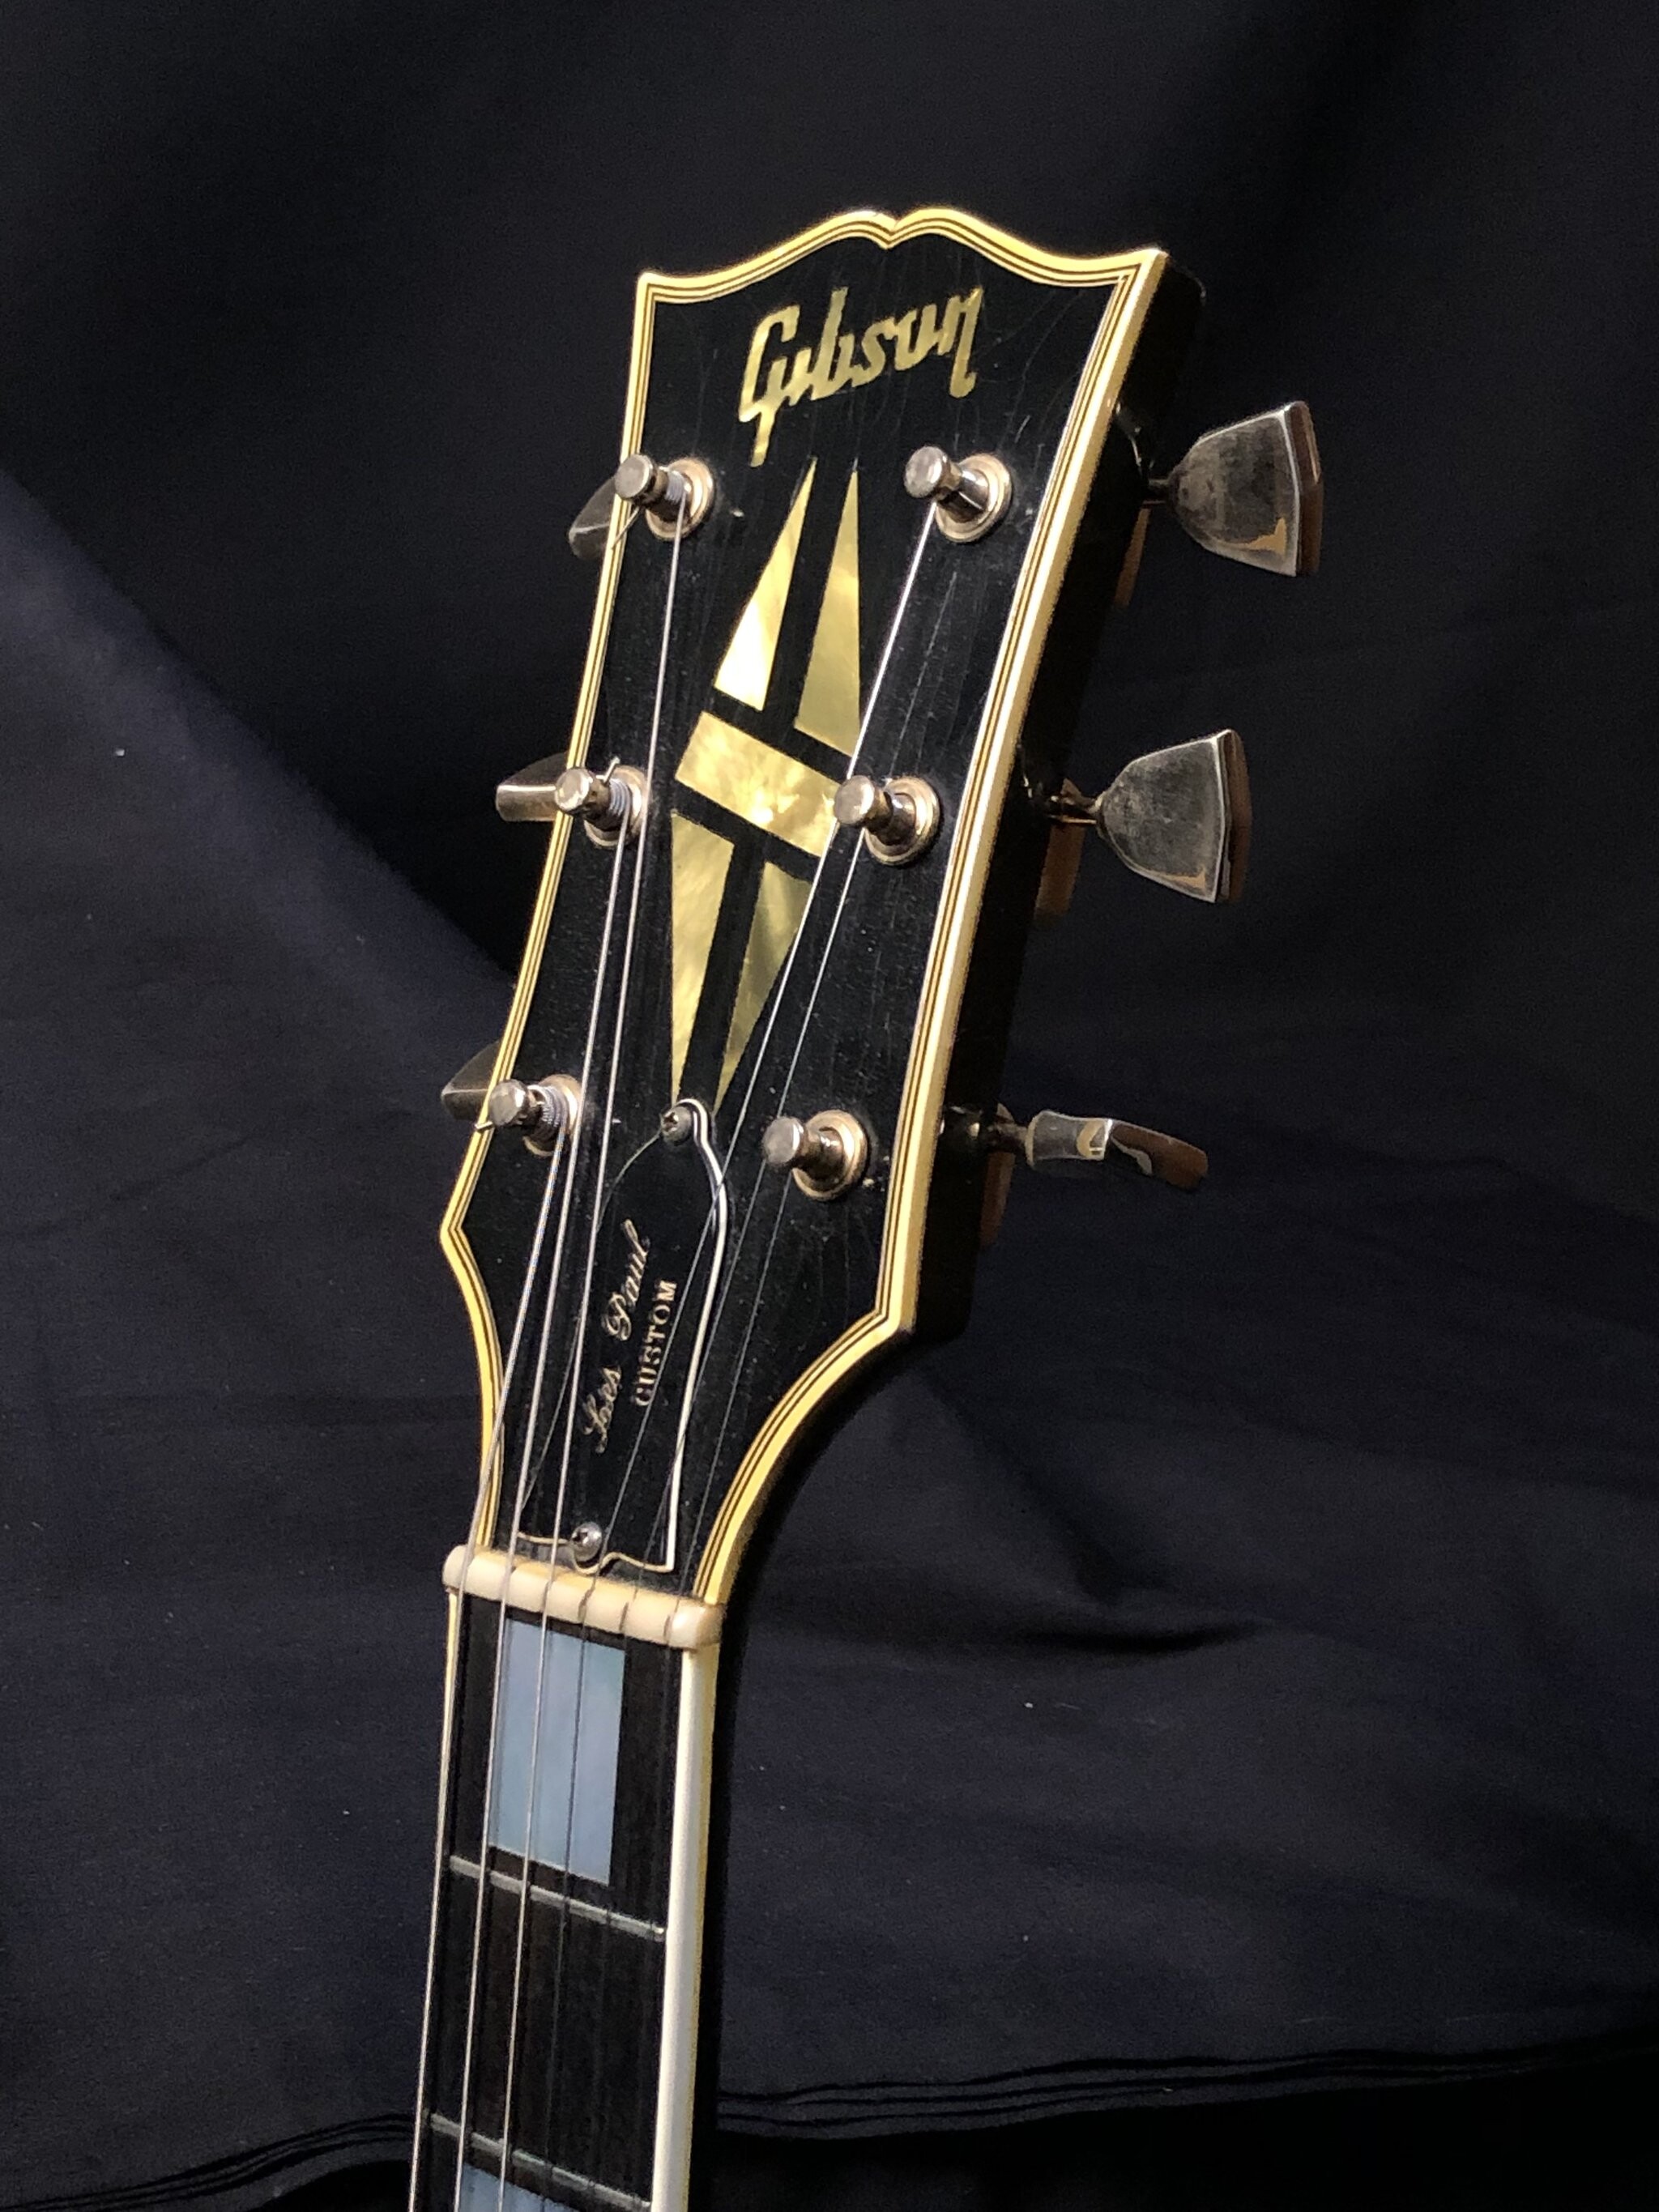 Gibson Guitar: Close Up For A Pegbox, Tunning Pegs, A Stringed Plucking Instrument. 2050x2740 HD Wallpaper.